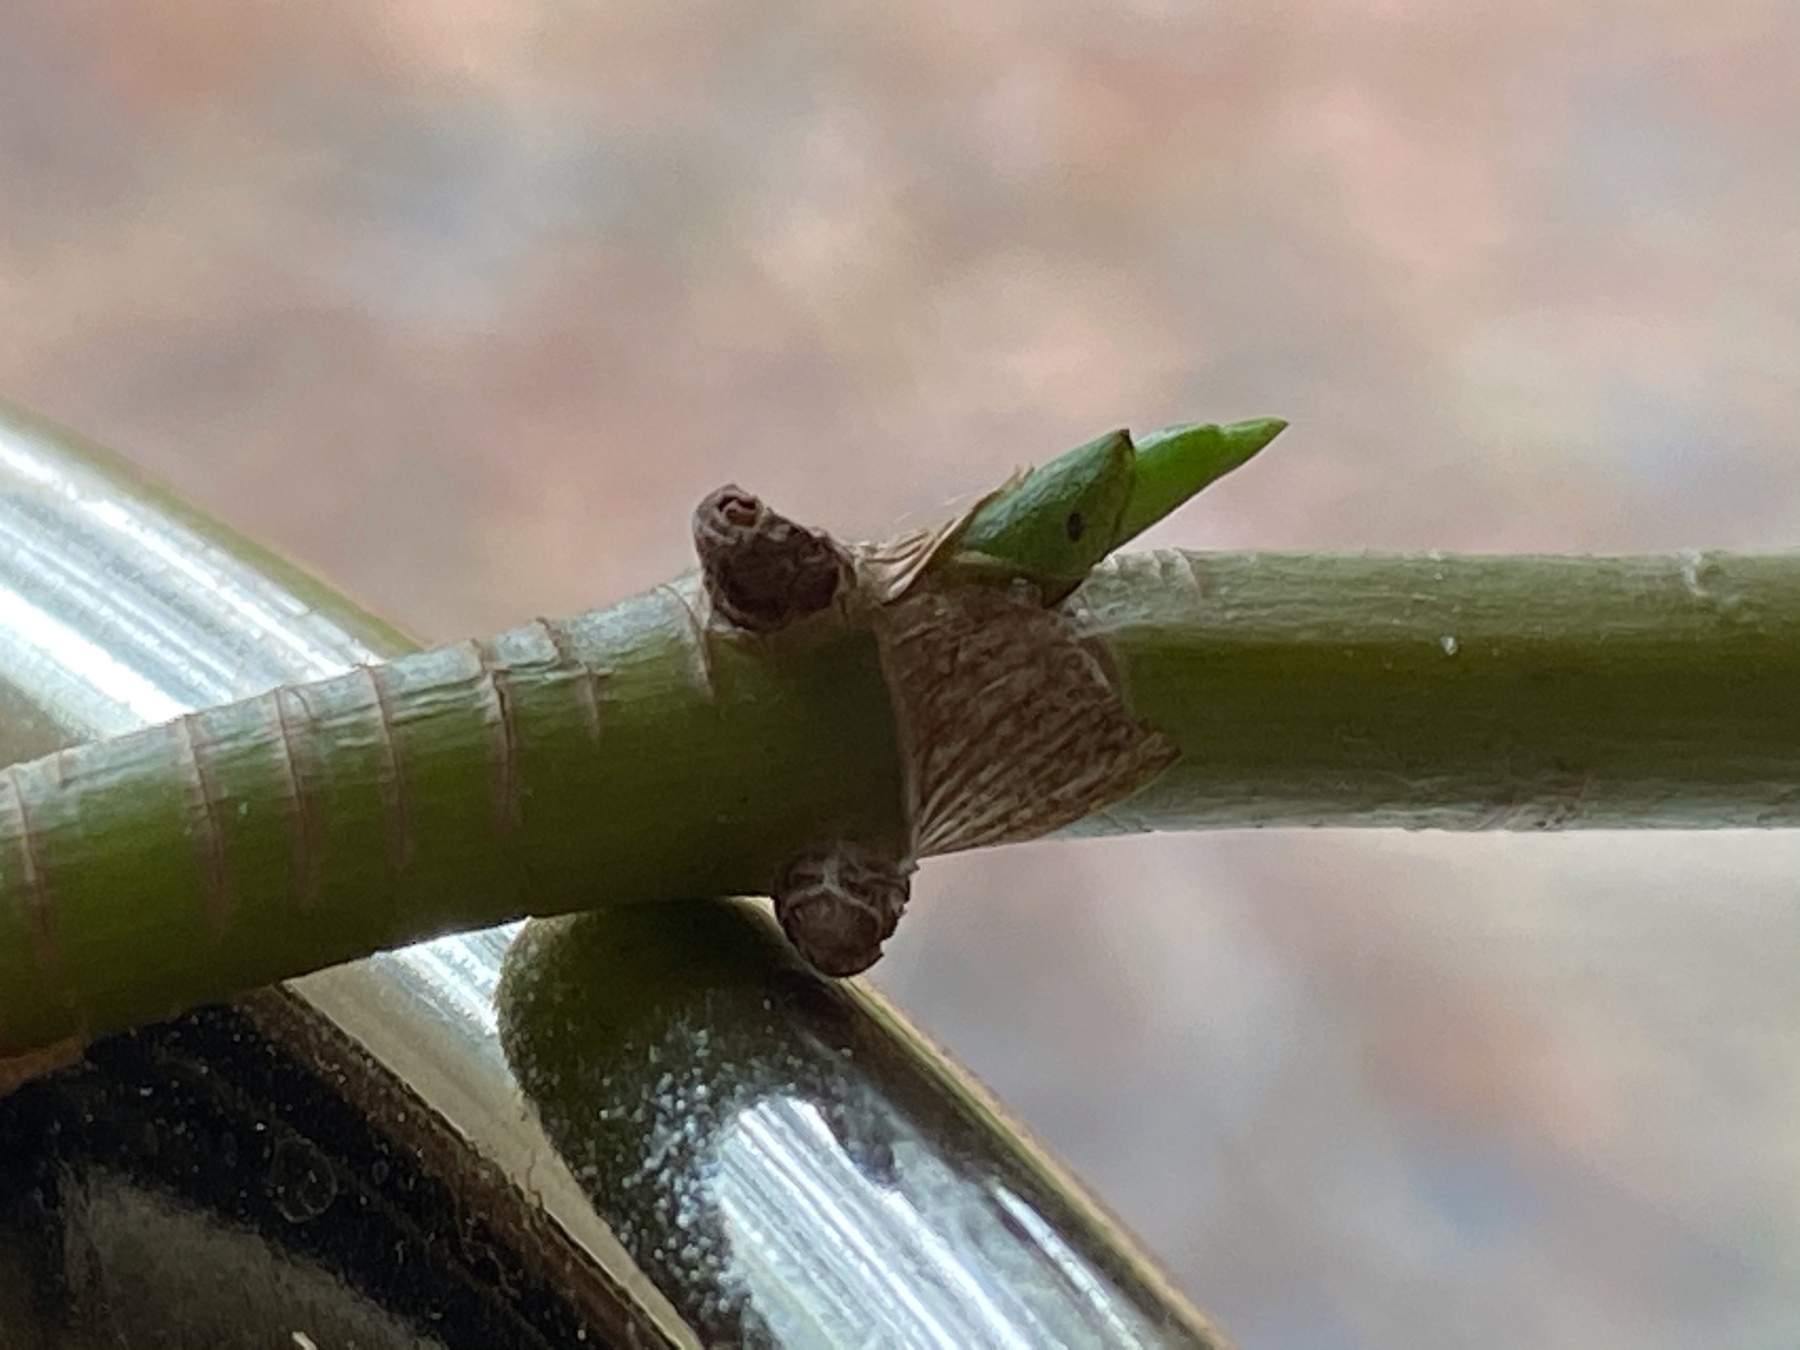 the stem of a plant sprouting a fresh, young bud